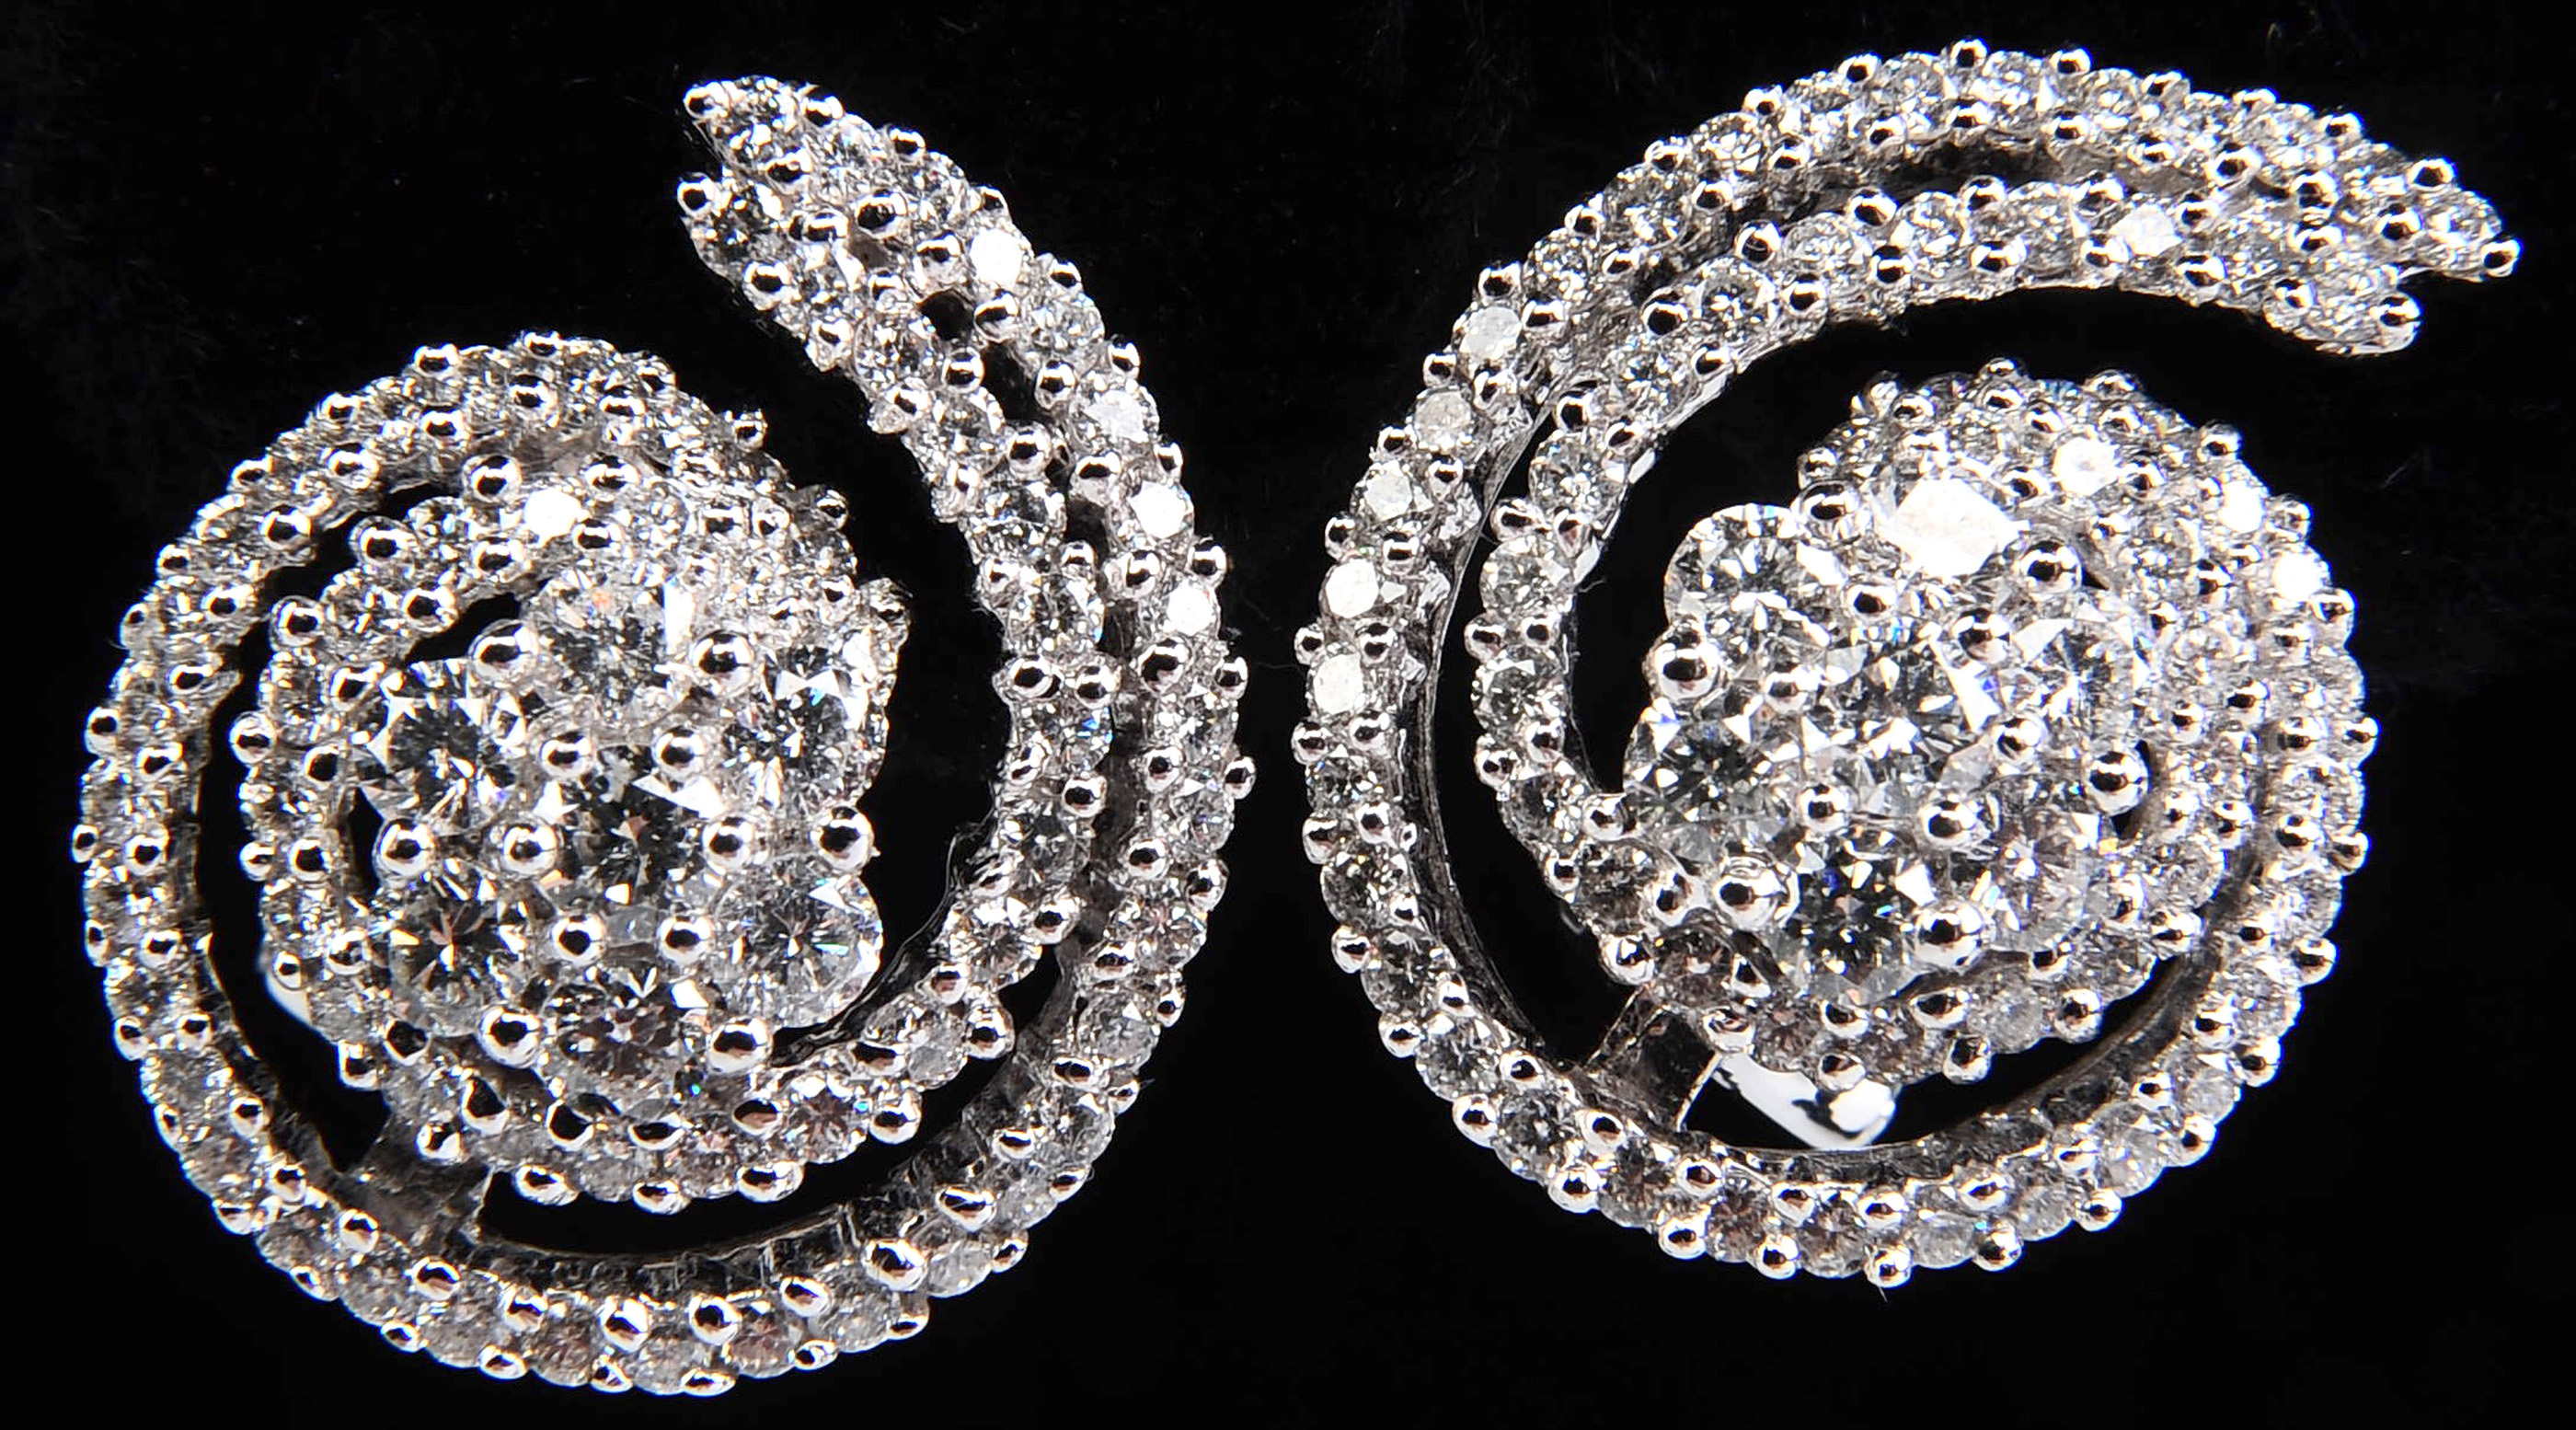 A PAIR 14K GOLD CLUSTER AND SWIRL DIAMOND EARRINGS